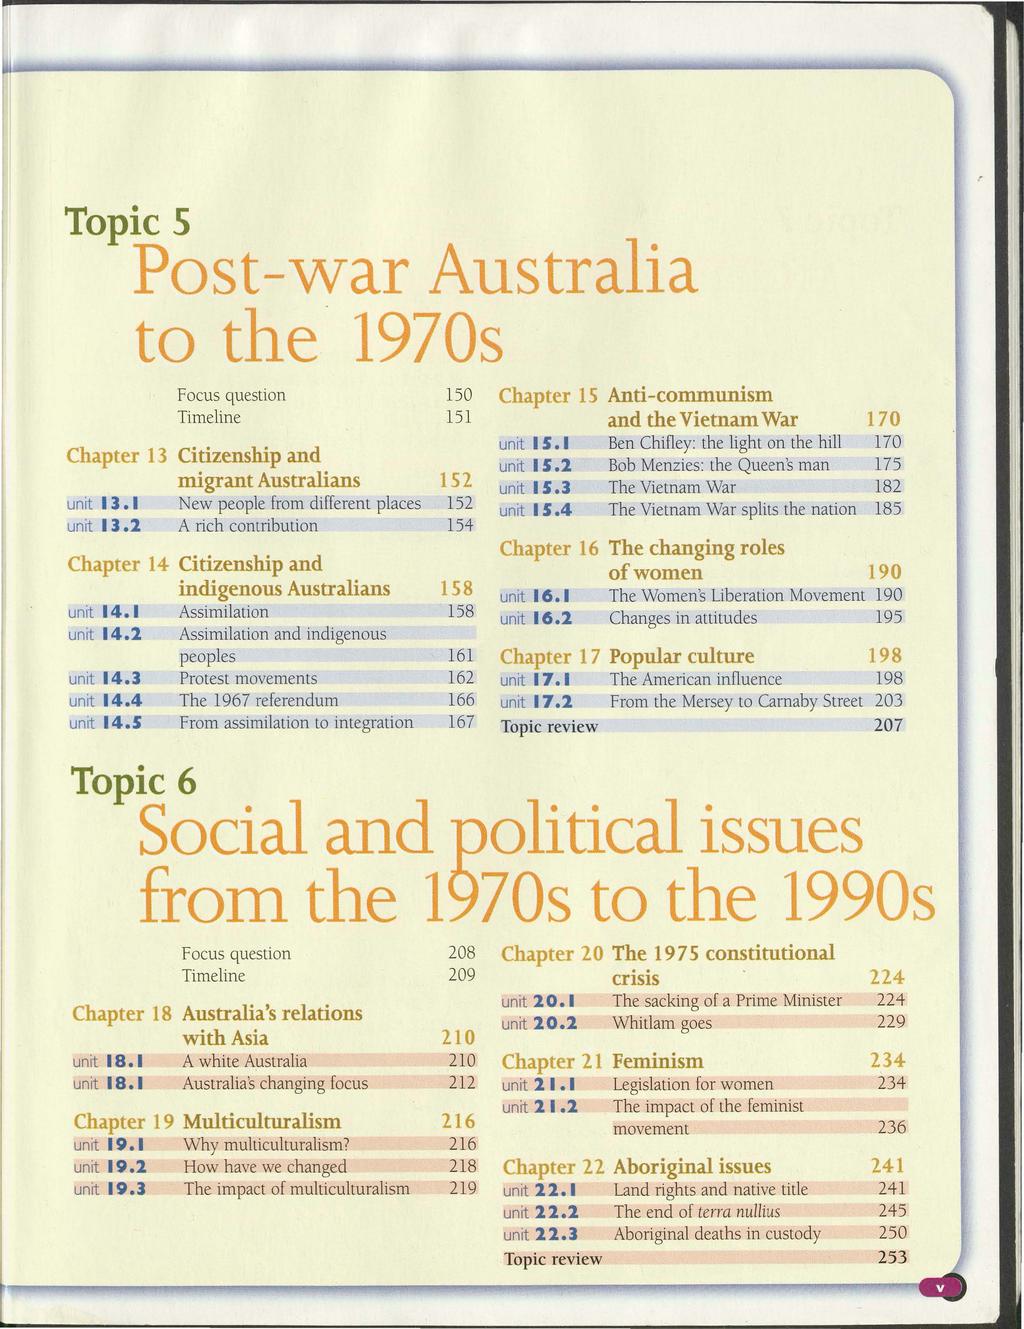 II I Topic S Post-war Australia to the. 1970s 150 Chapter 15 Anti-communism Timeline 151 and the Vietnam War 170 unit 15. I Ben Chifley: the light on the hill 170 unit 15.